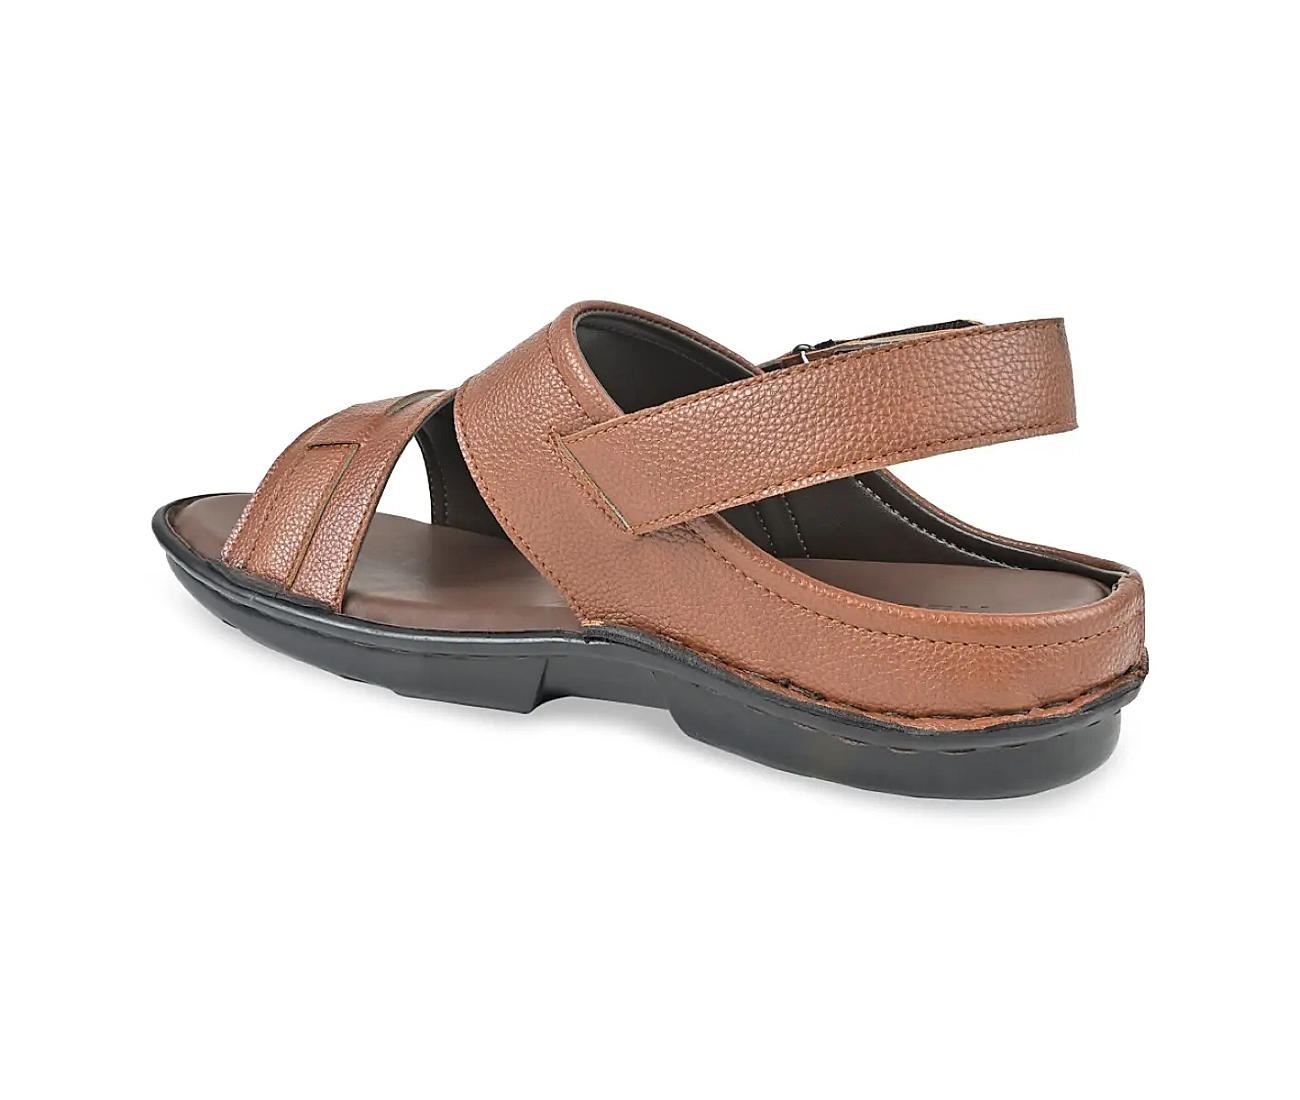 Fisio flat sandal women stylish Casual Latest trendy new model sandals Pink-thephaco.com.vn